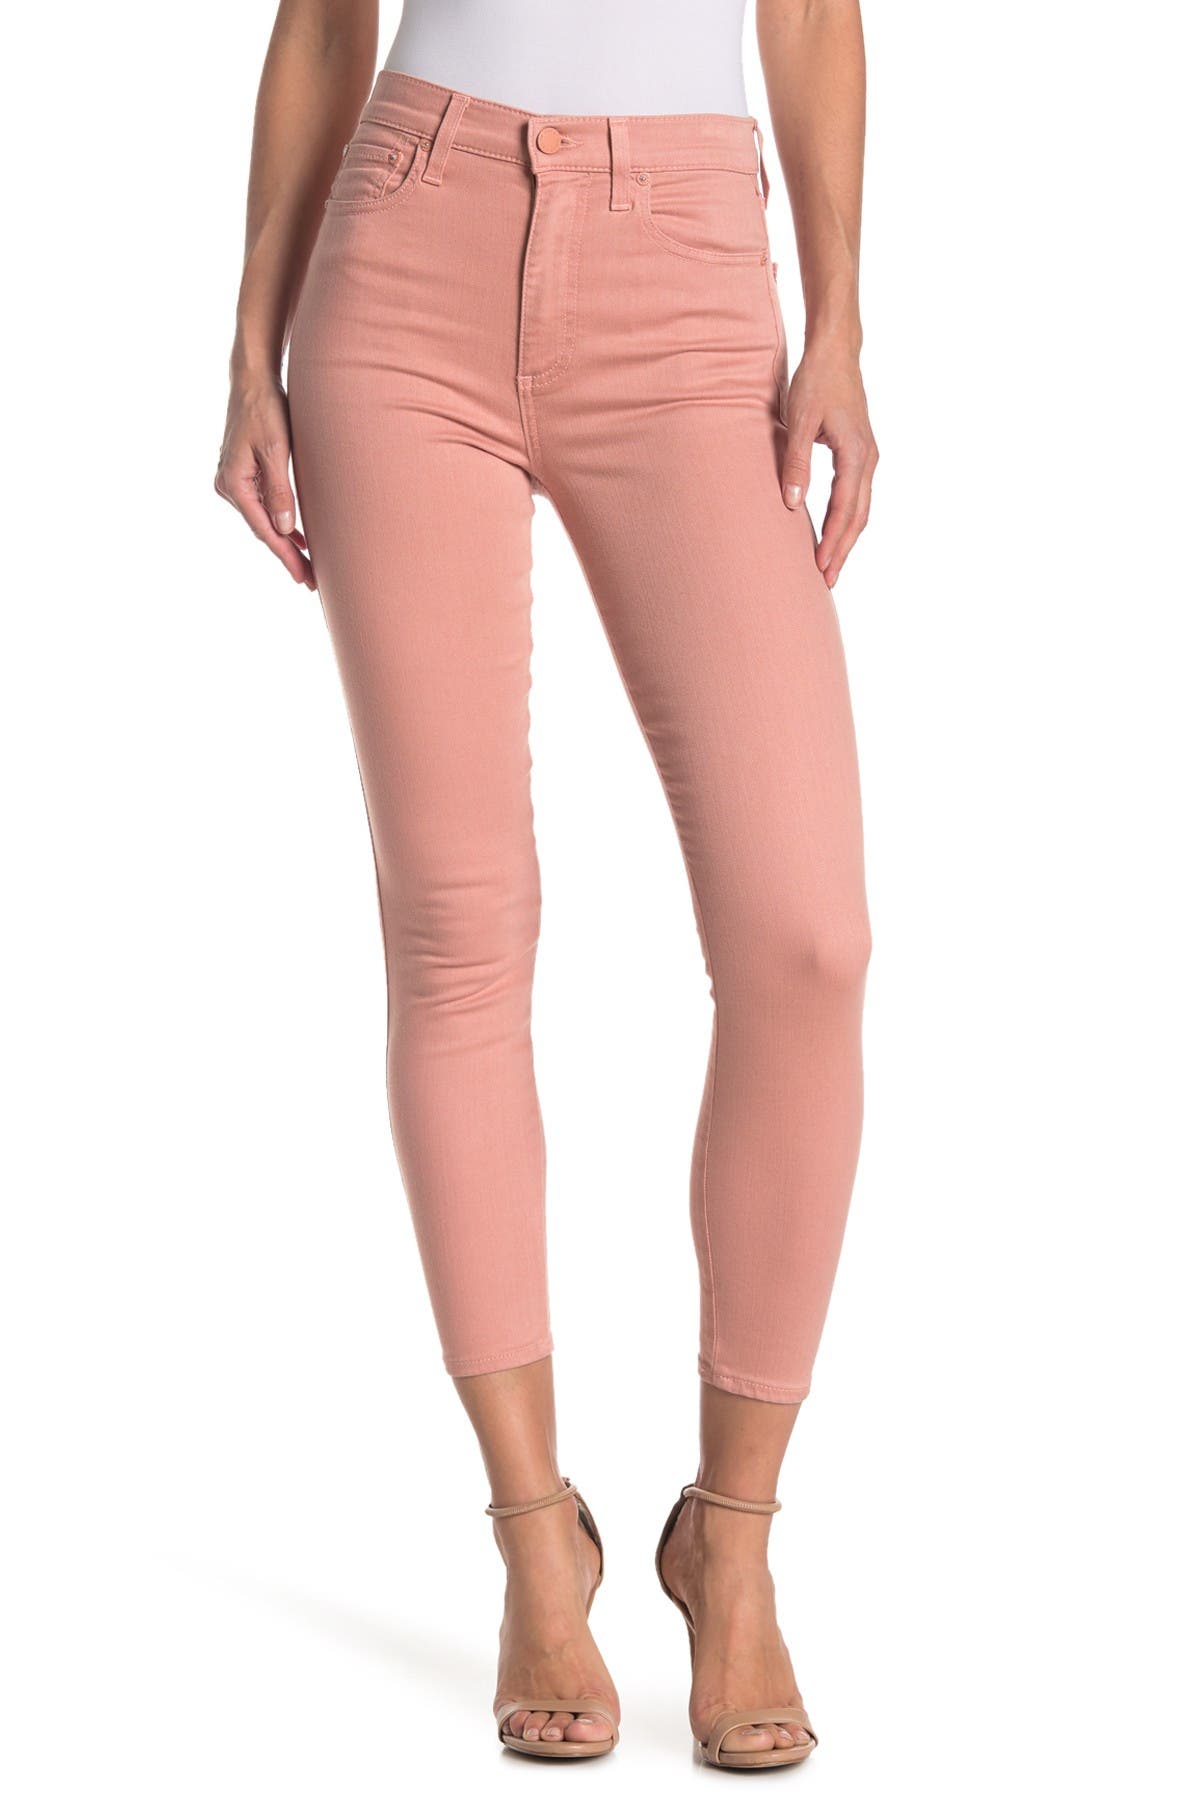 Alice And Olivia Good High Rise Ankle Skinny Jeans In Rose Tan